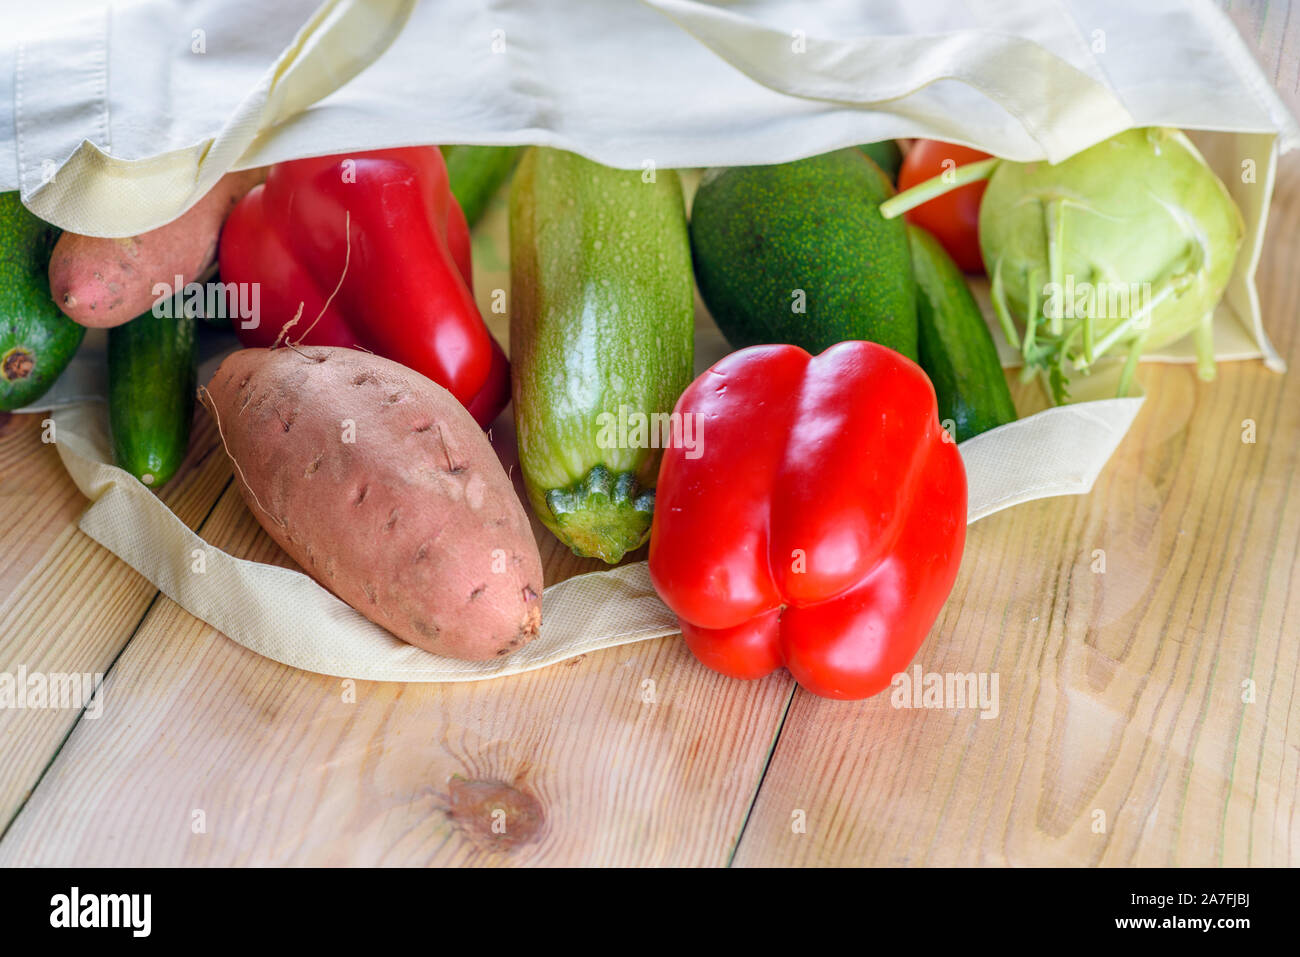 World free of plastic.Reusable eco friendly canvas grocery shopping bag with vegetables-sweet potato, zucchini, pepper, tomatoes, cucumber and avocado on wooden desk. Organic products. Less plastic. Stock Photo